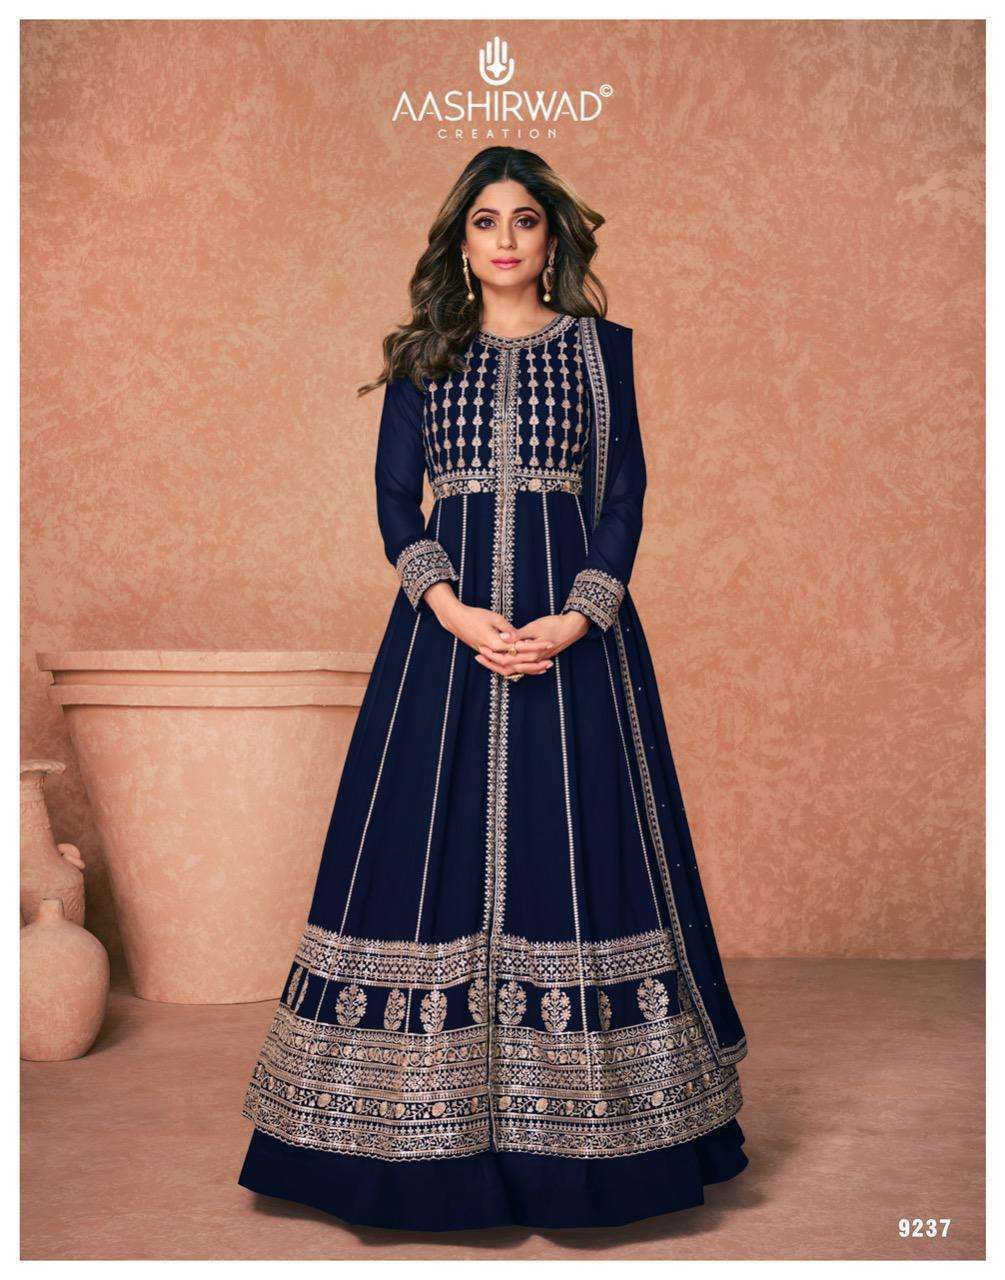 Fancy Anarkali Suit In Panchkula - Prices, Manufacturers & Suppliers